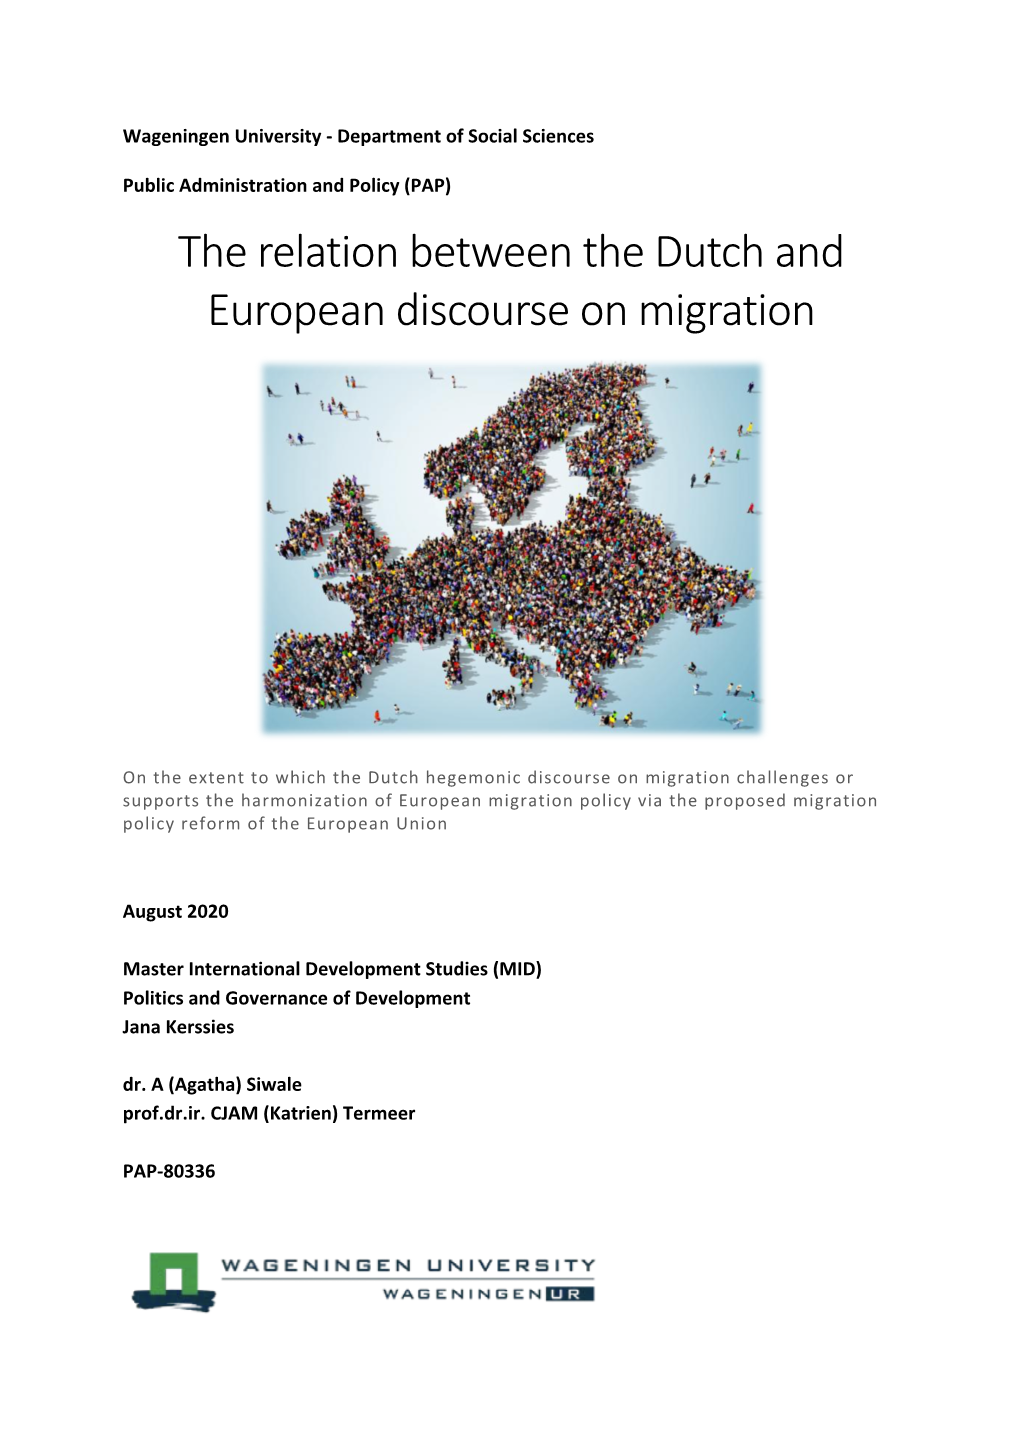 The Relation Between the Dutch and European Discourse on Migration